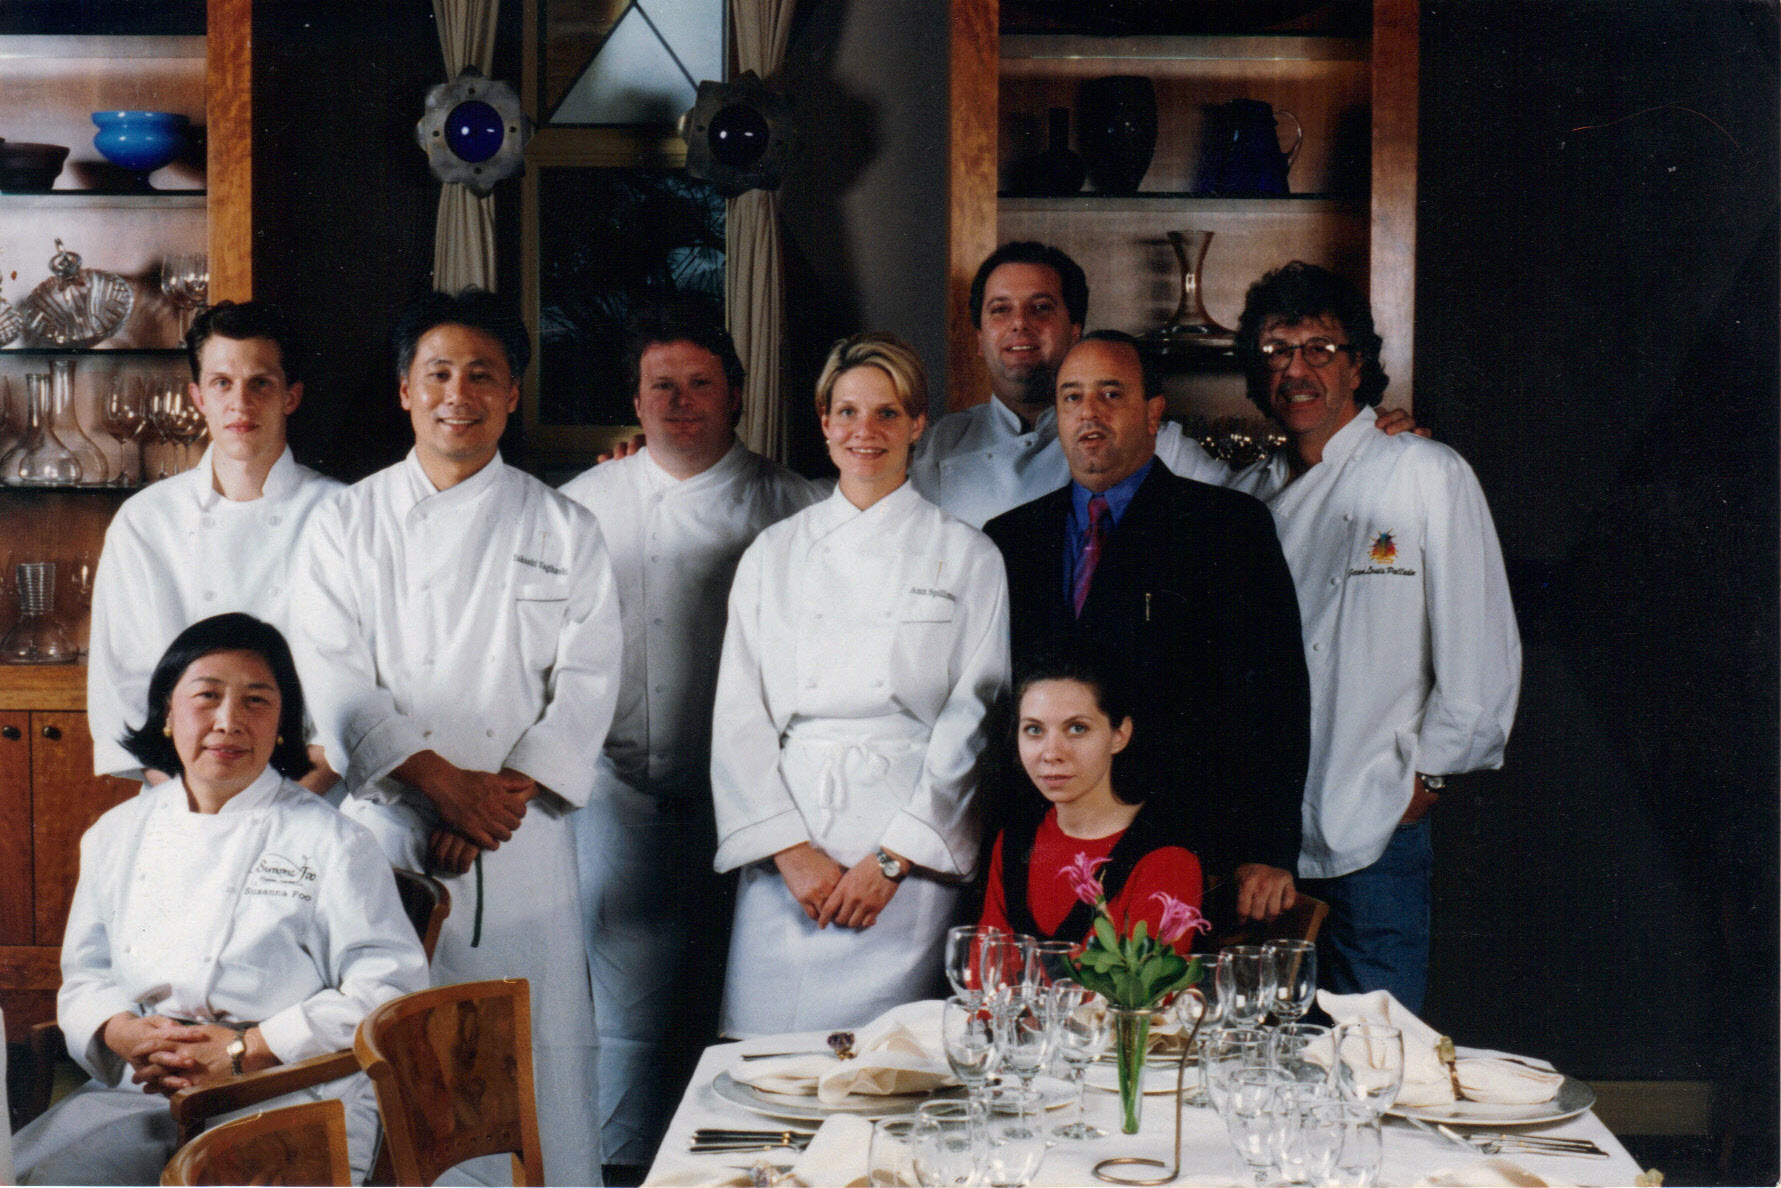 A picture taken in 1999 at Tribute restaurant during a Guest Chef Dinner